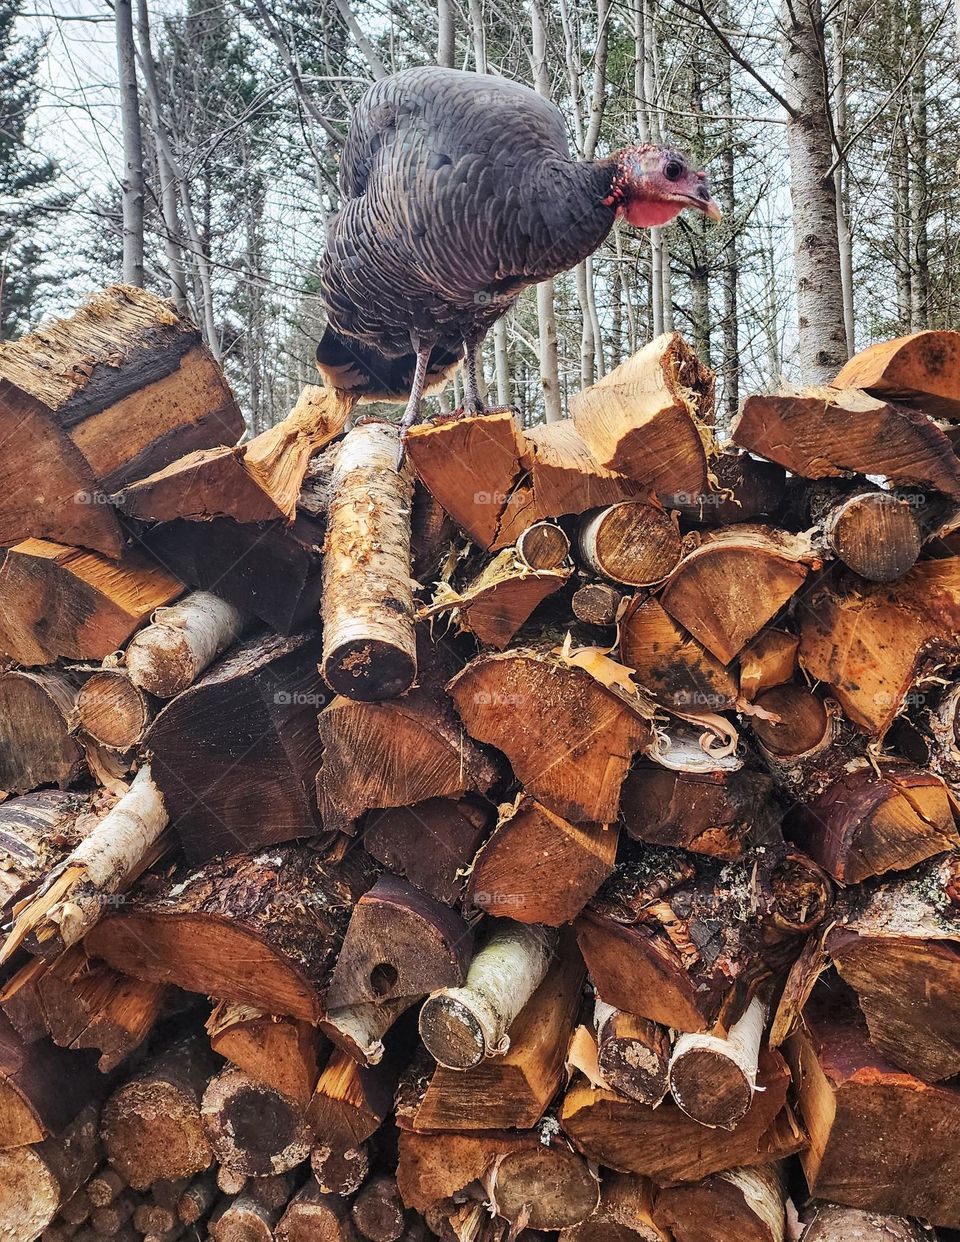 Turkey on top of a pile of wood.